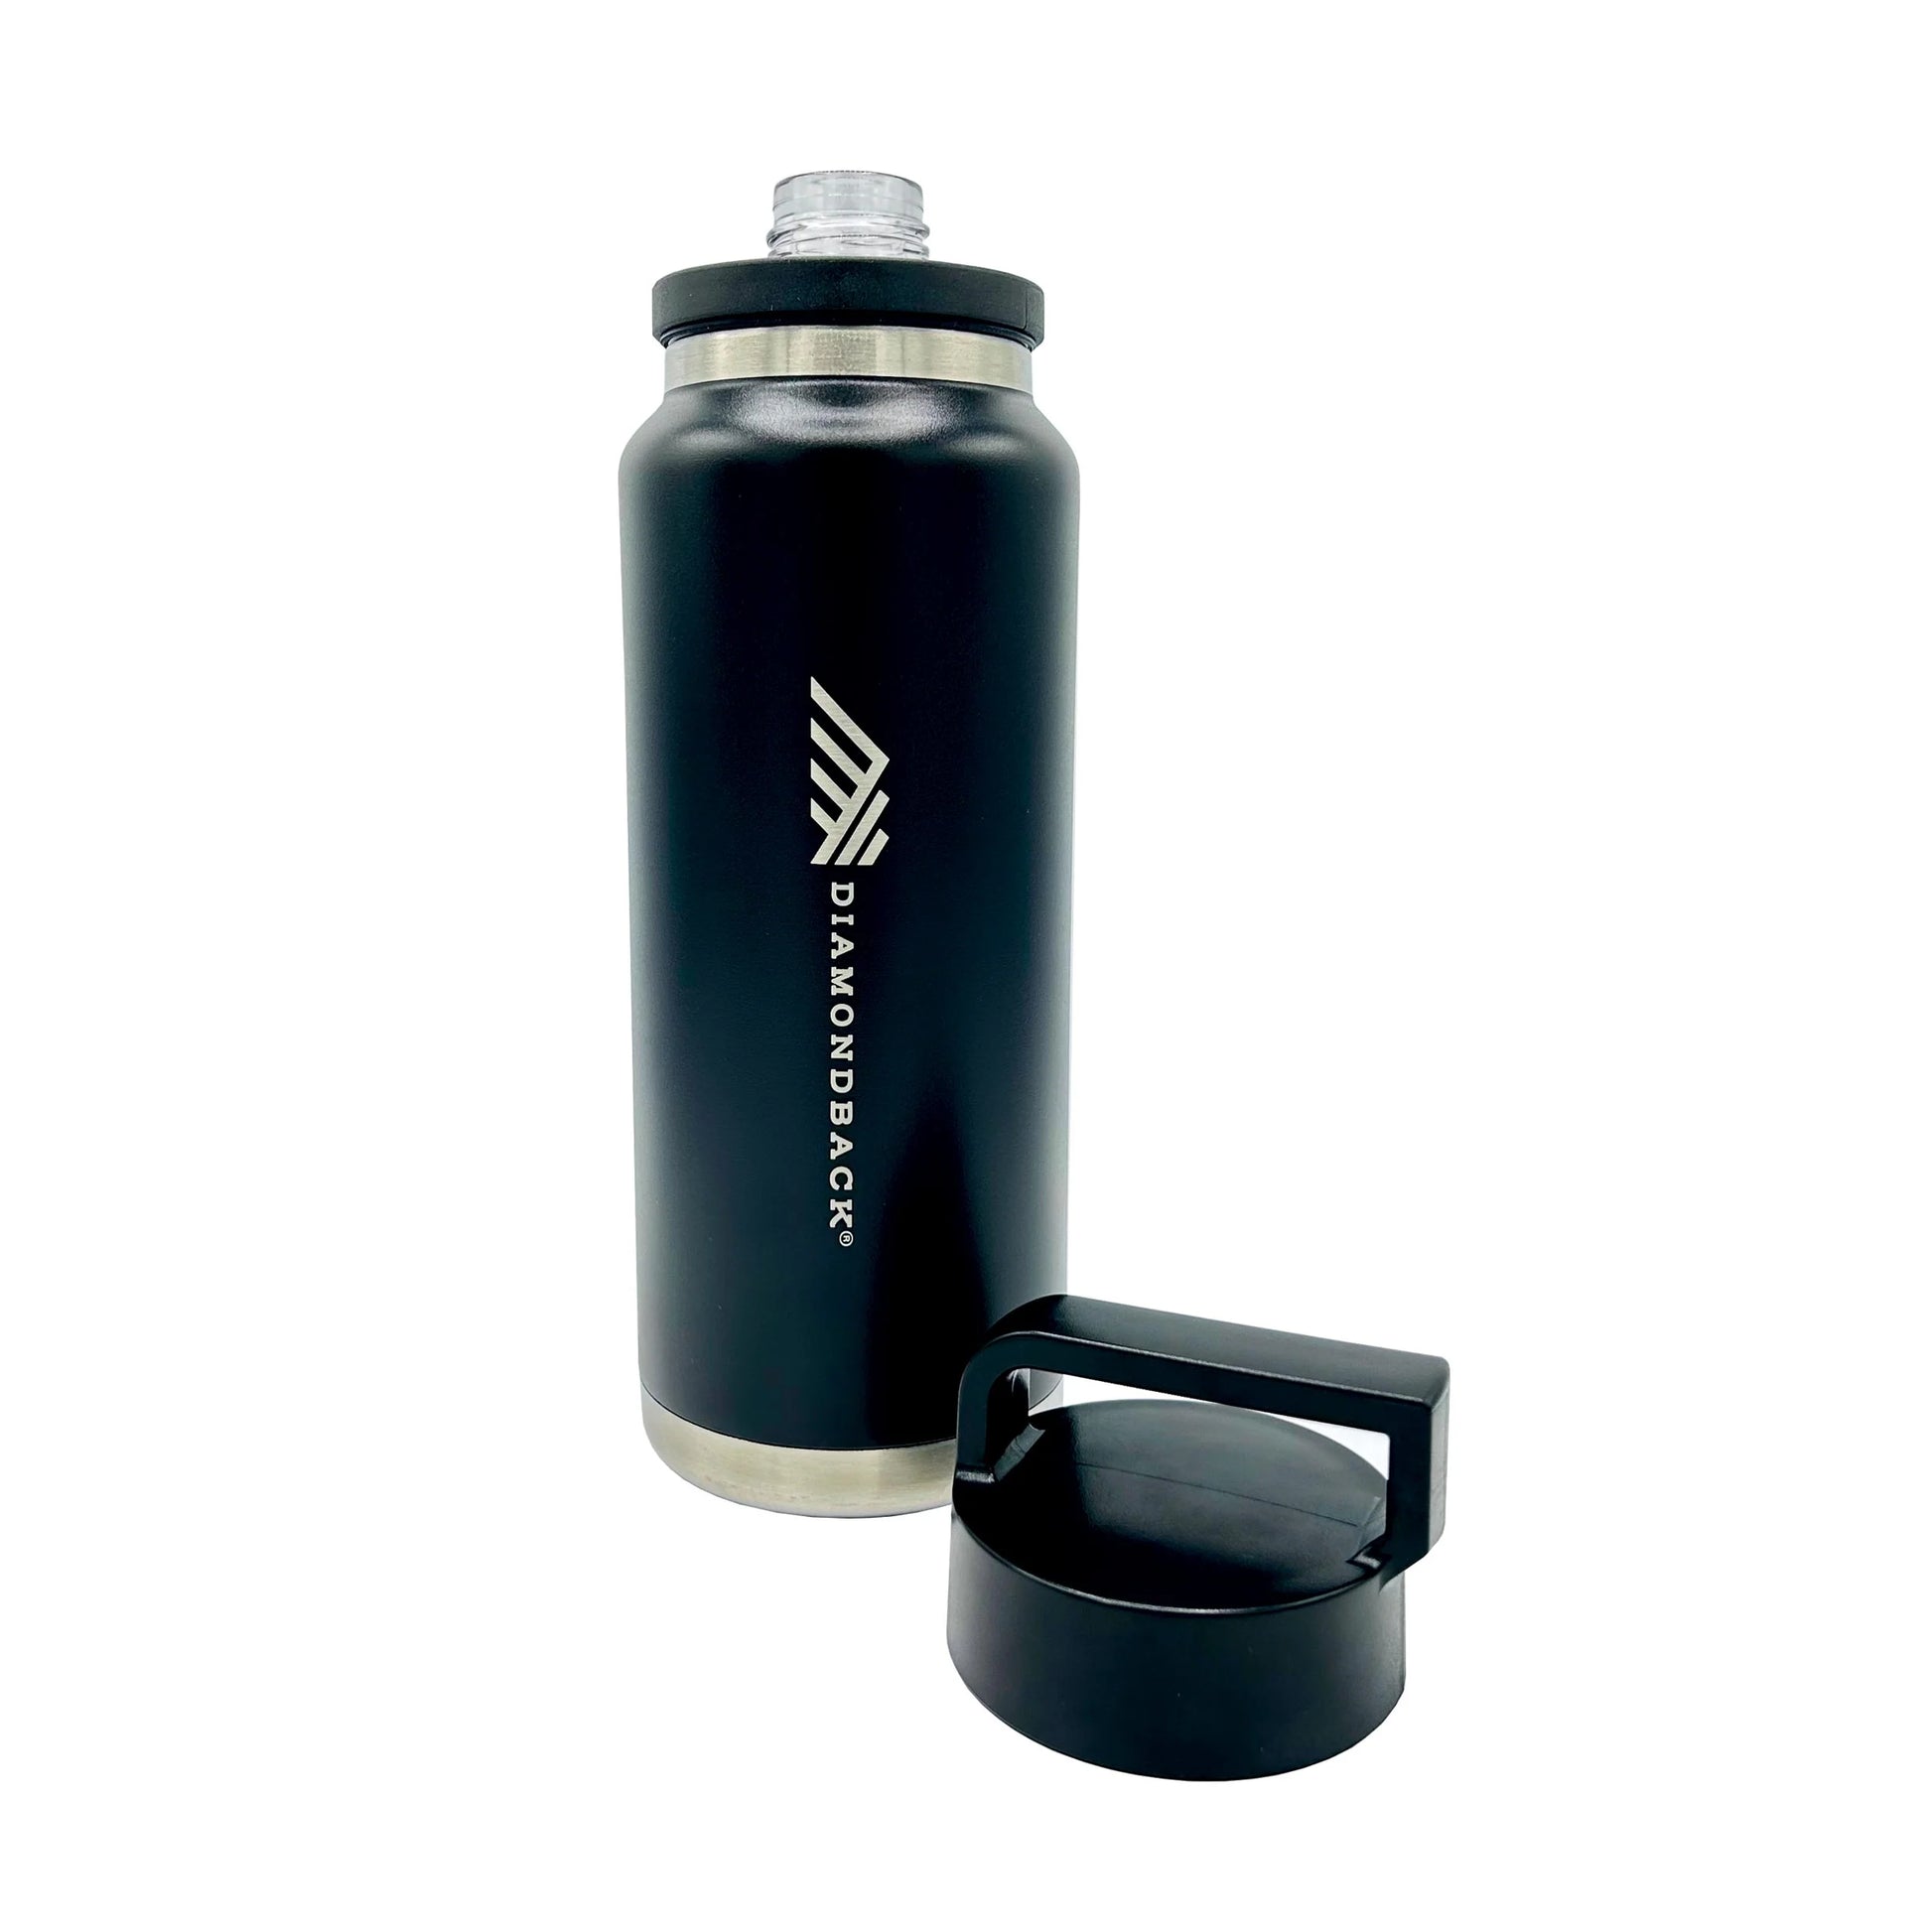 Leakproof and drop-resistant Diamondback H2Go bottle with durable screw-on lid and laser-etched logo, available in 18oz and 36oz sizes